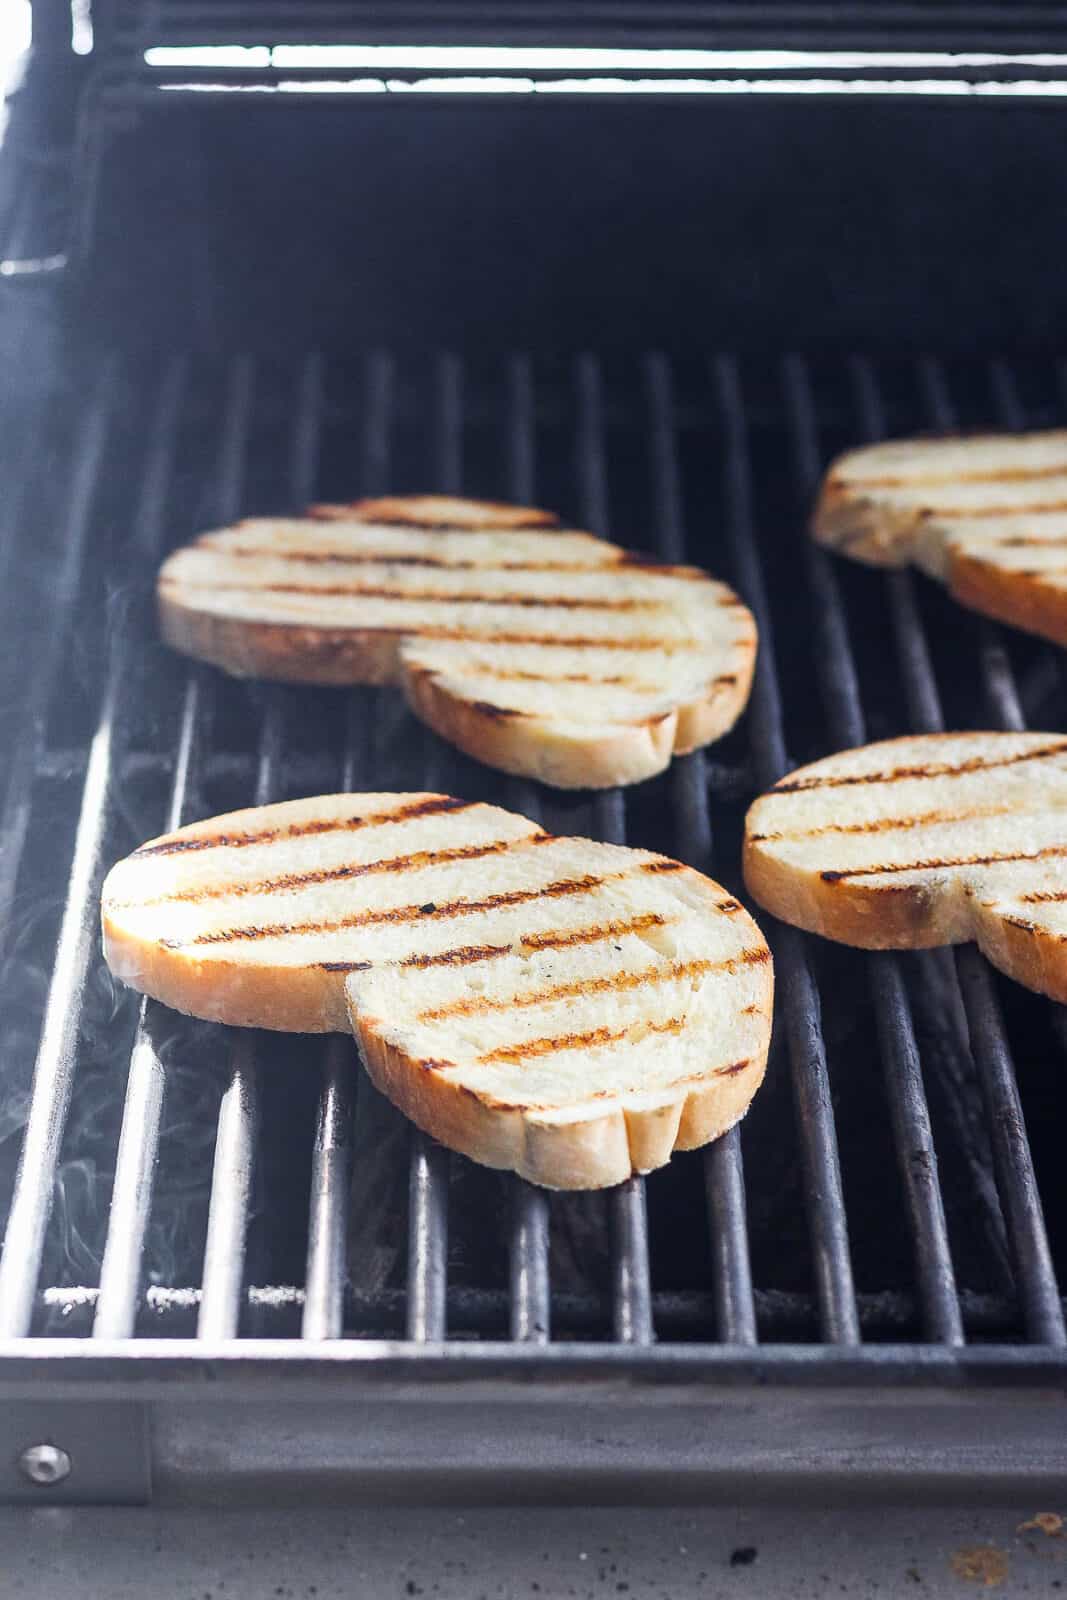 Grilled bread on the grill.